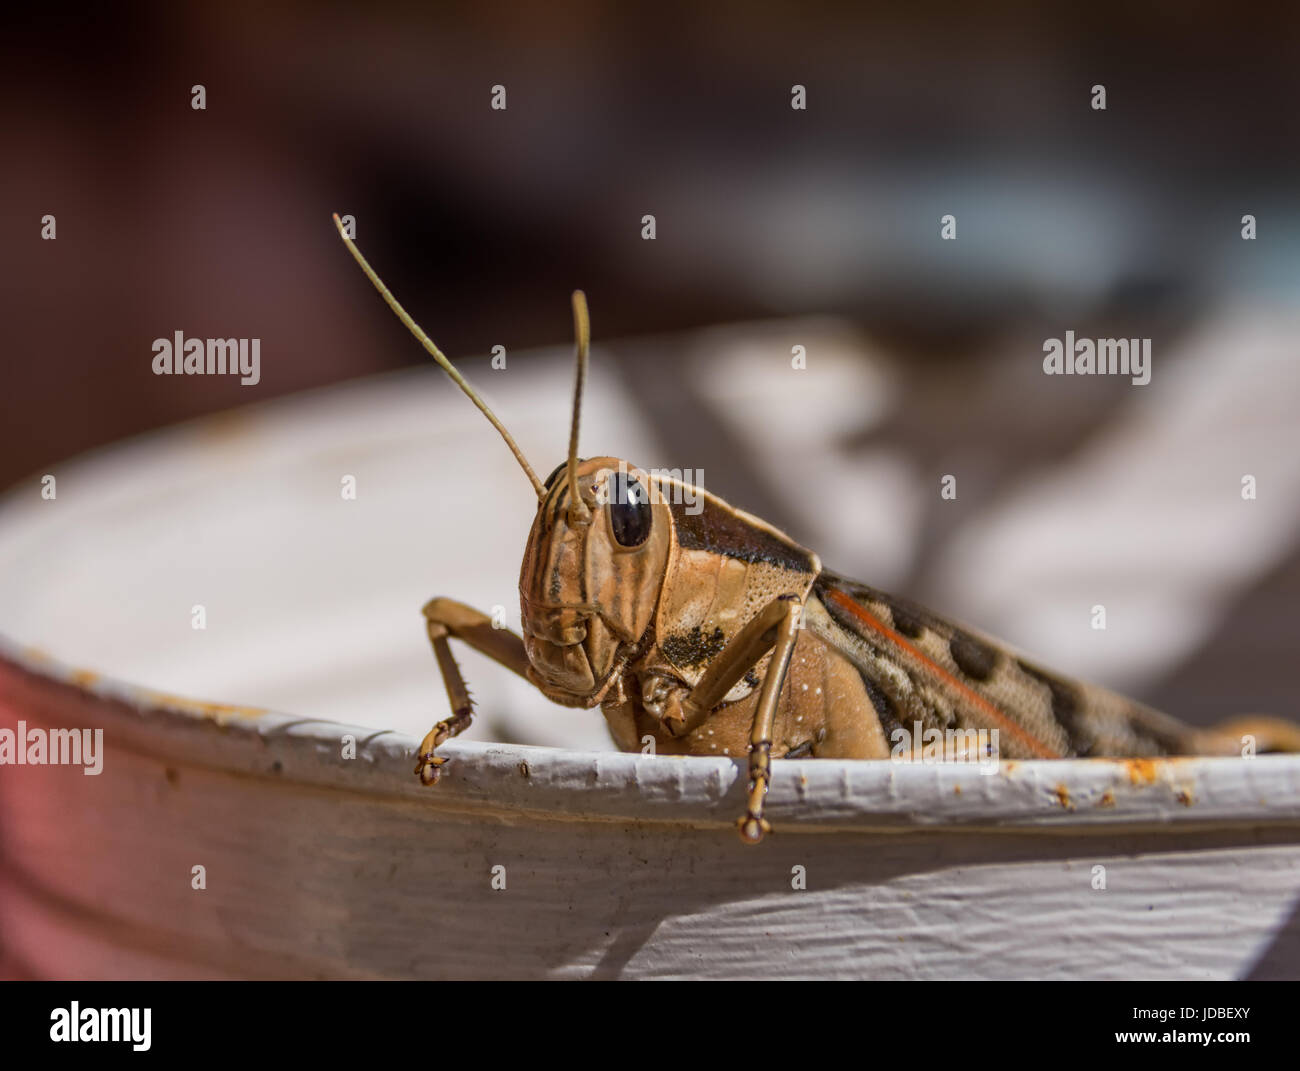 A Garden Locust in Southern Africa Stock Photo